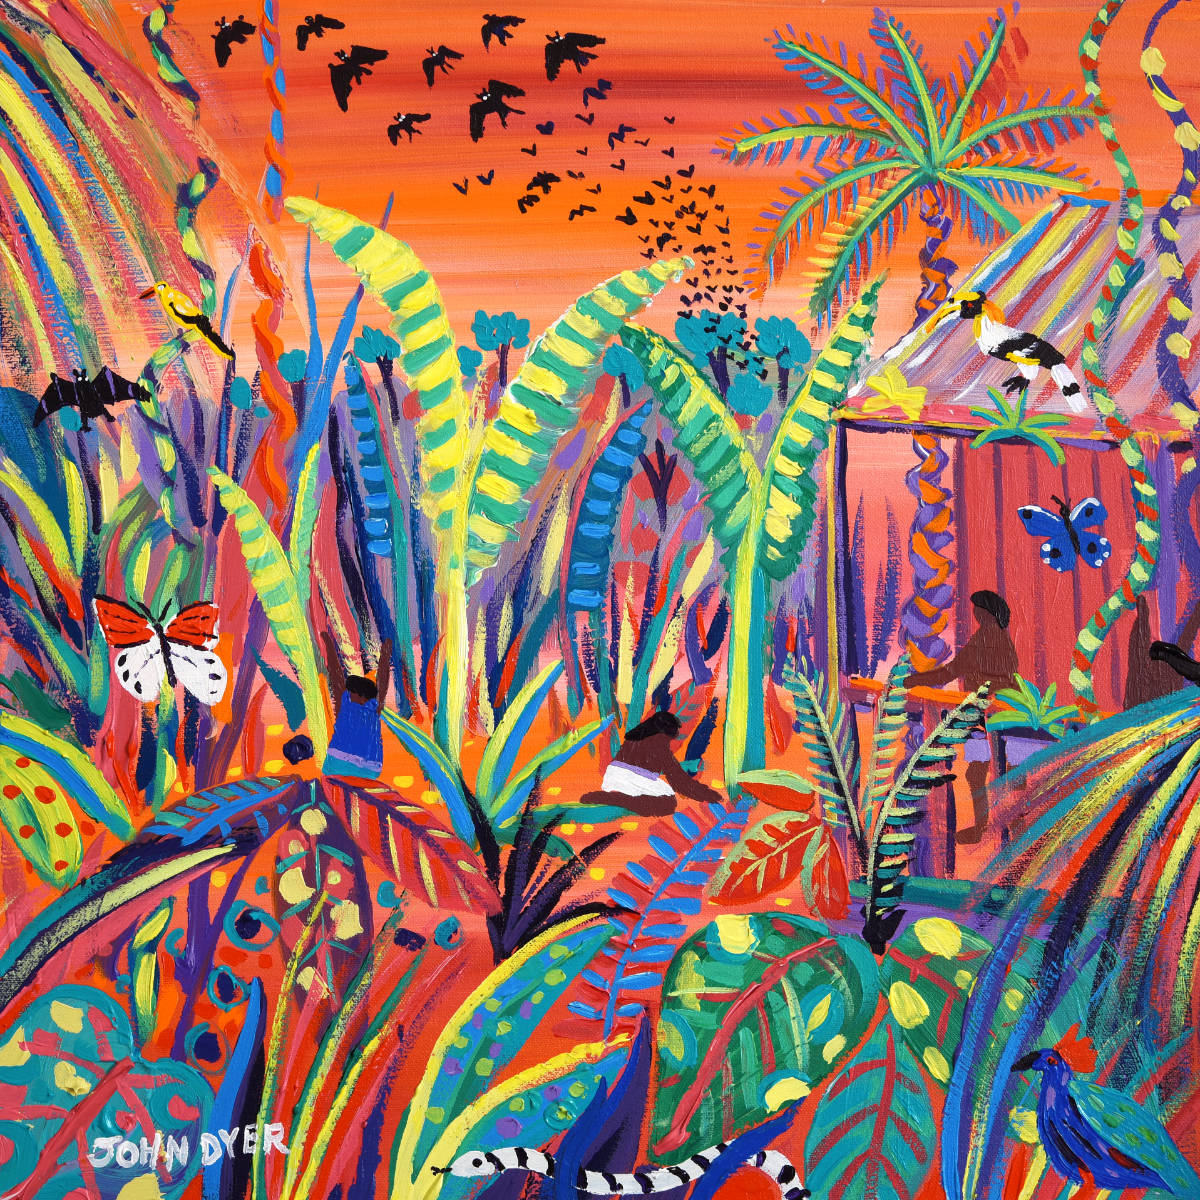 &#39;Borneo Rainforest Sunset&#39;, 18x18 inches acrylic on canvas. Borneo Jungle Painting by Environmental Artist John Dyer. Cornwall Art Gallery